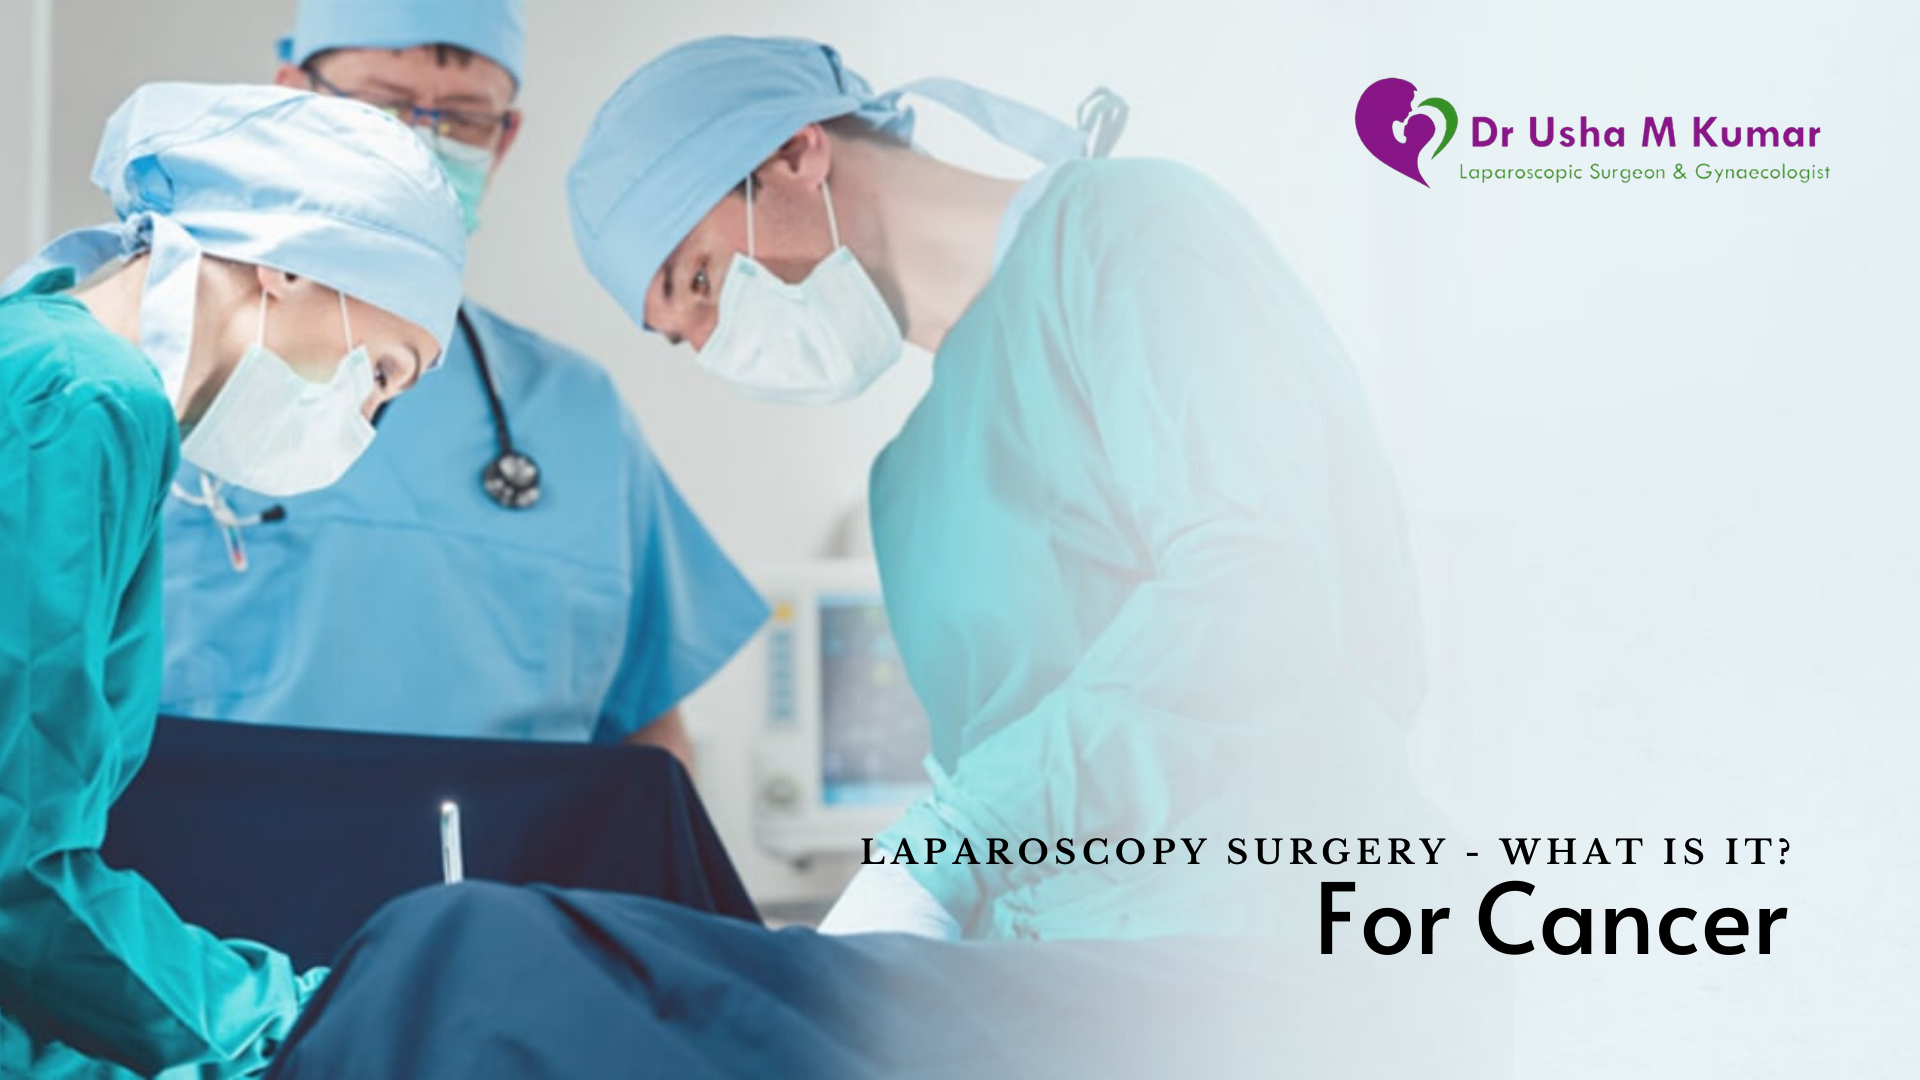 Best Cancer Surgeon in India - Laparoscopy Surgery for Cancer